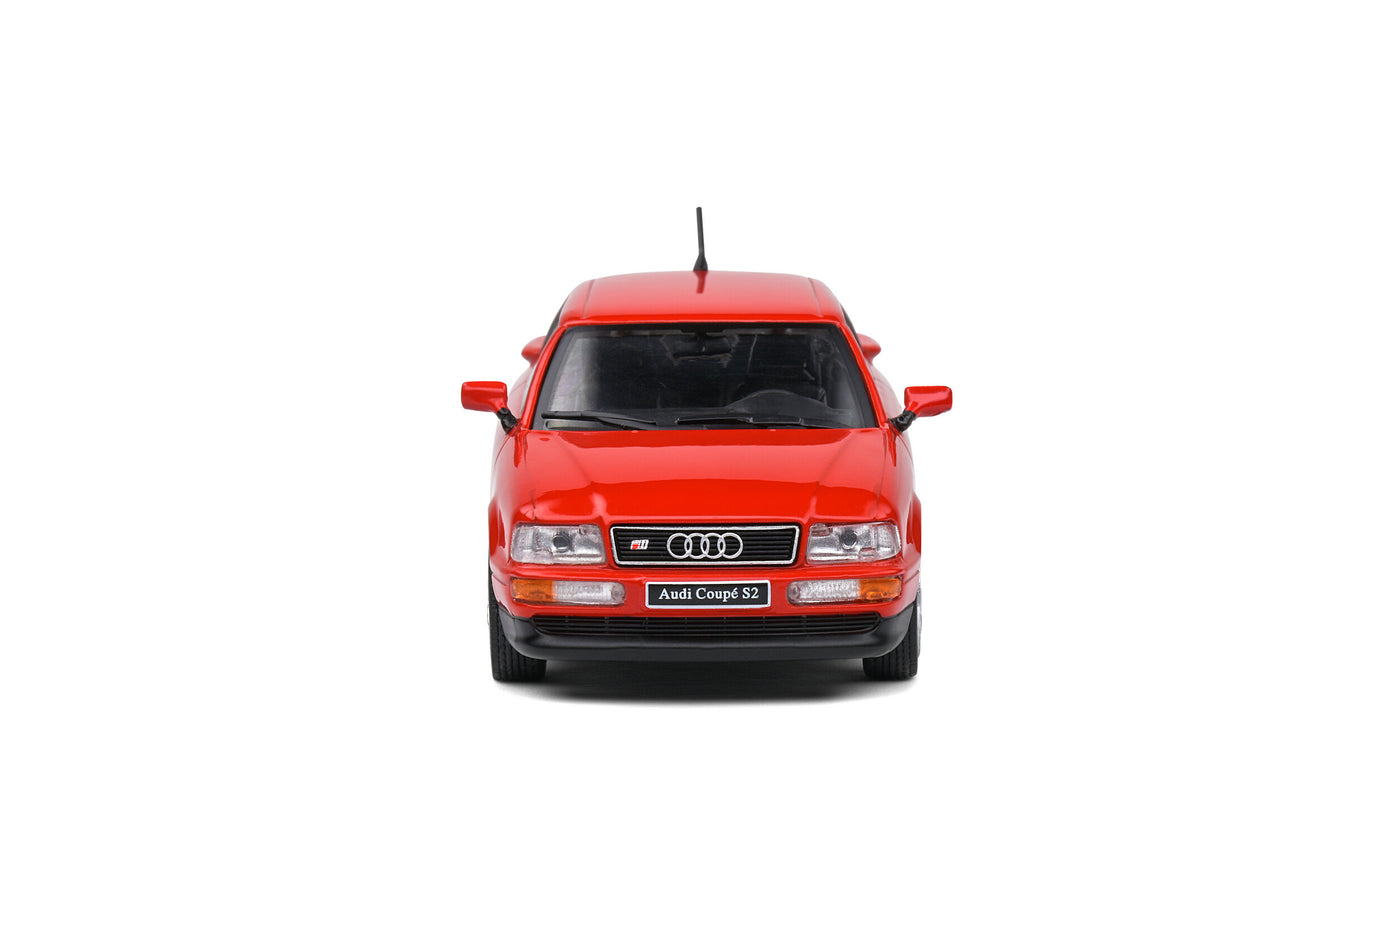 Solido: 1992 Audi Coupe S2 Red 1:43